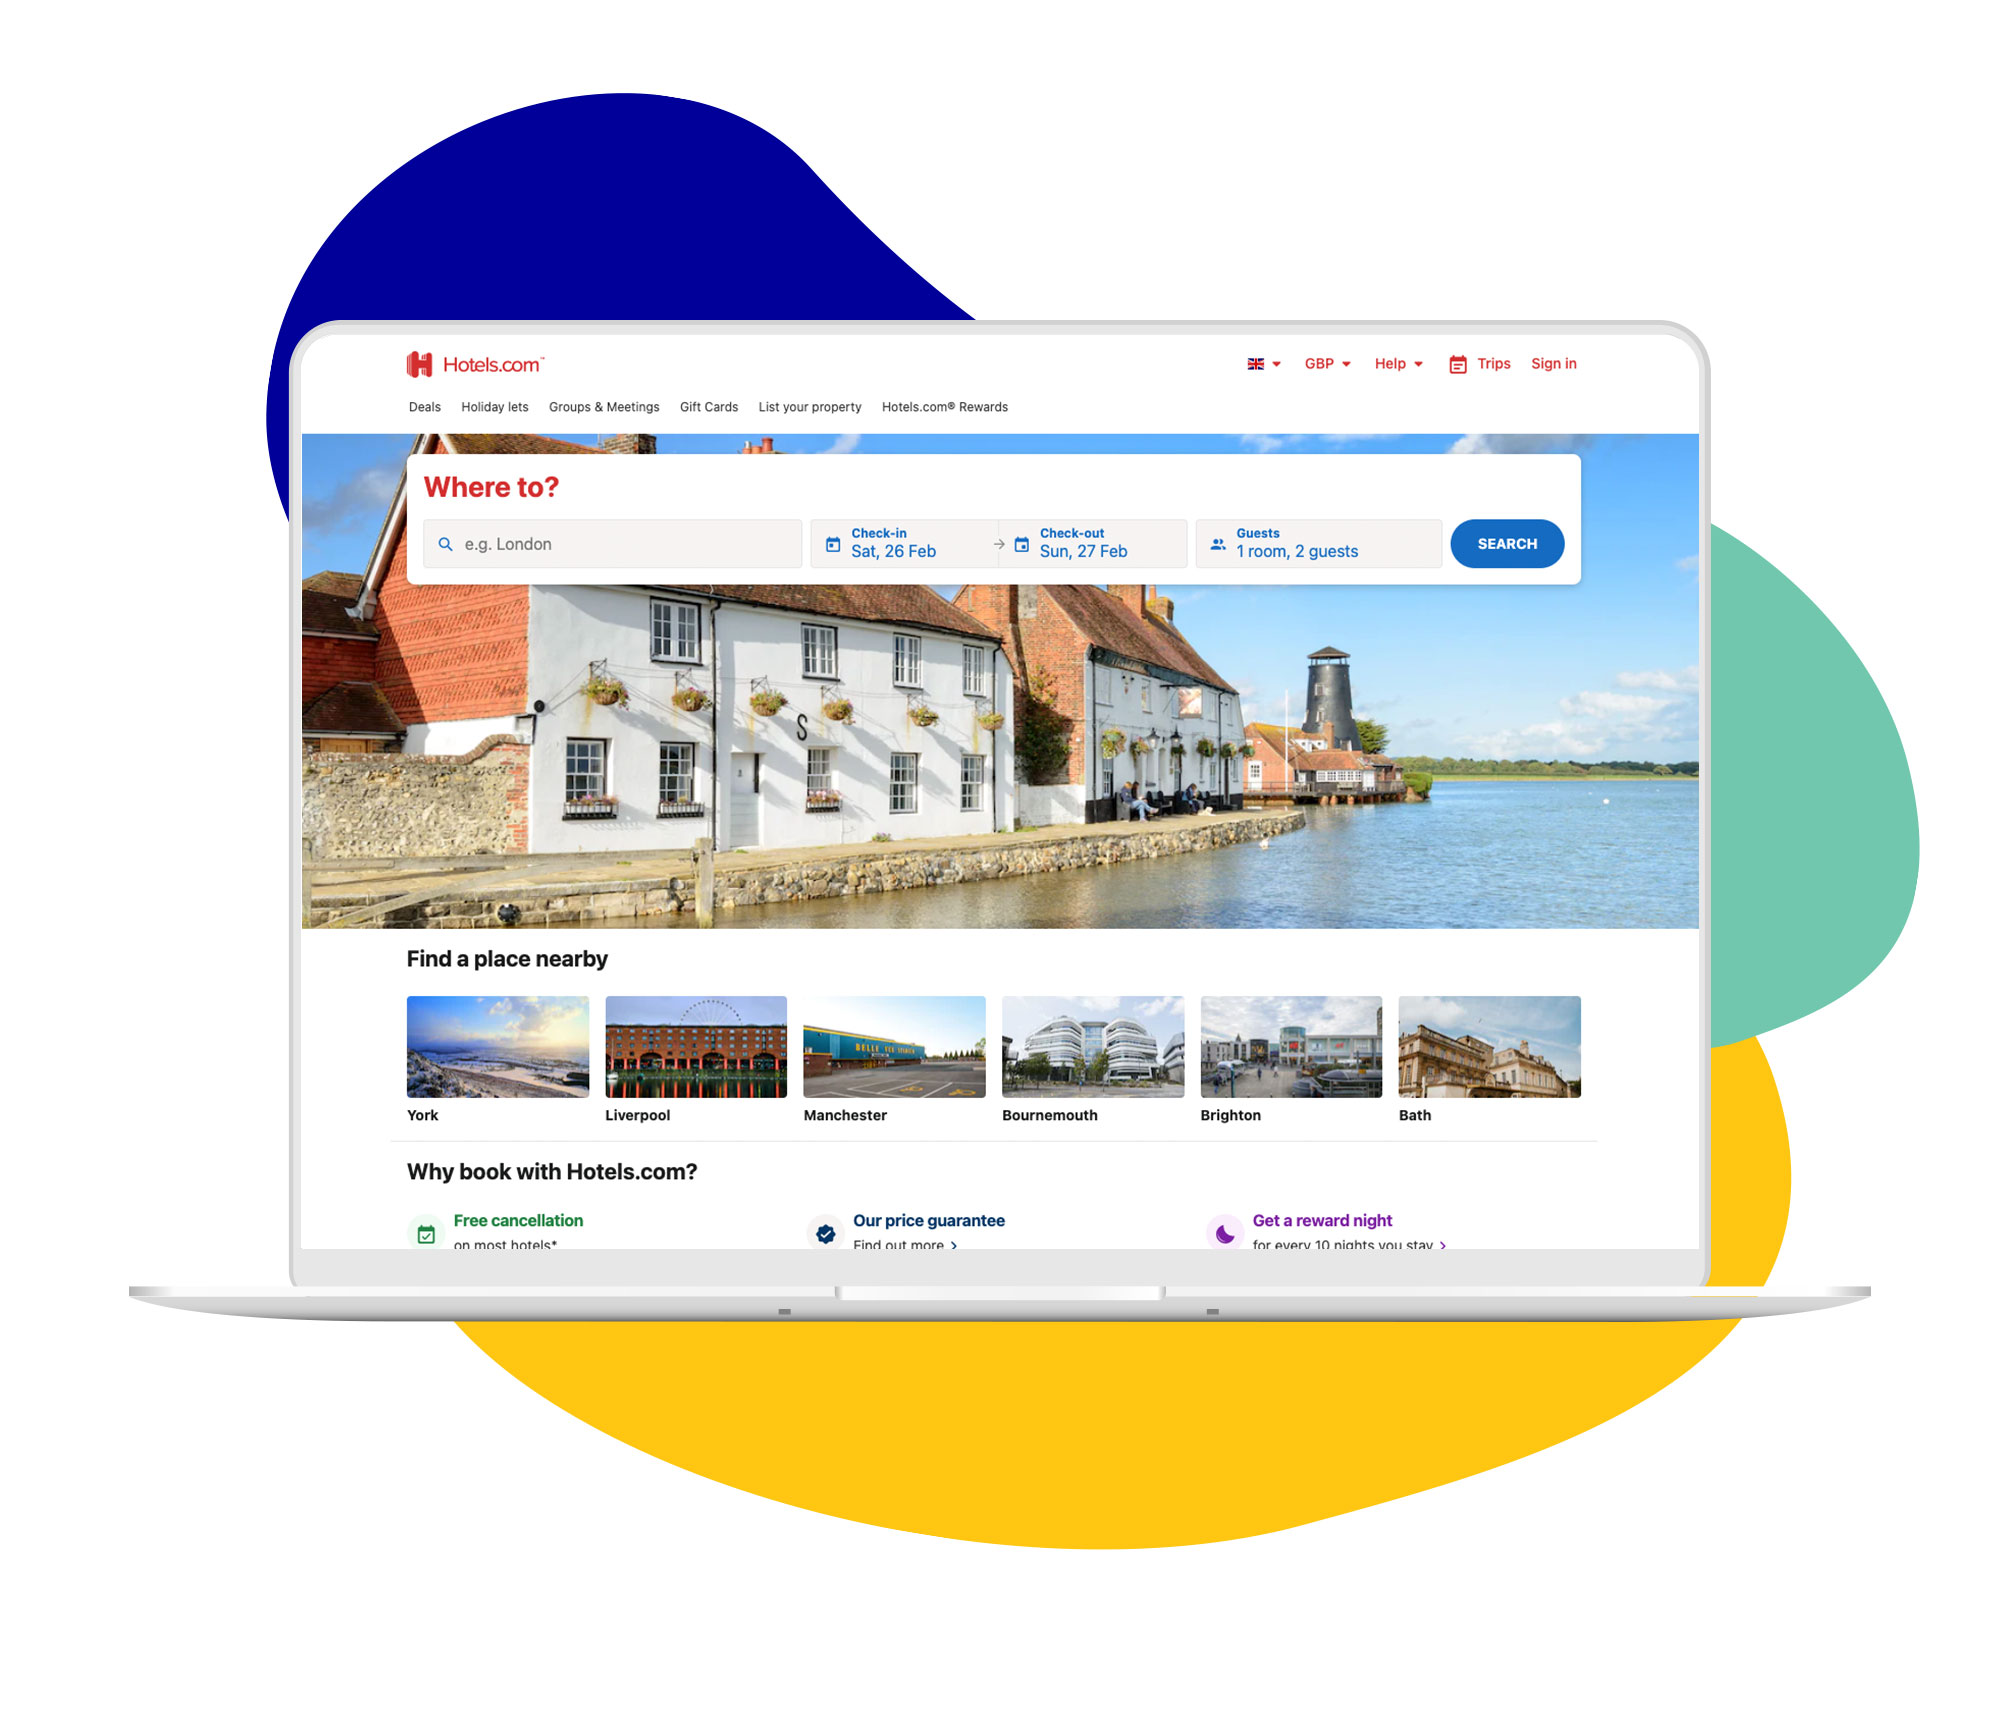 Advertise on Vrbo  Expedia Group Media Solutions